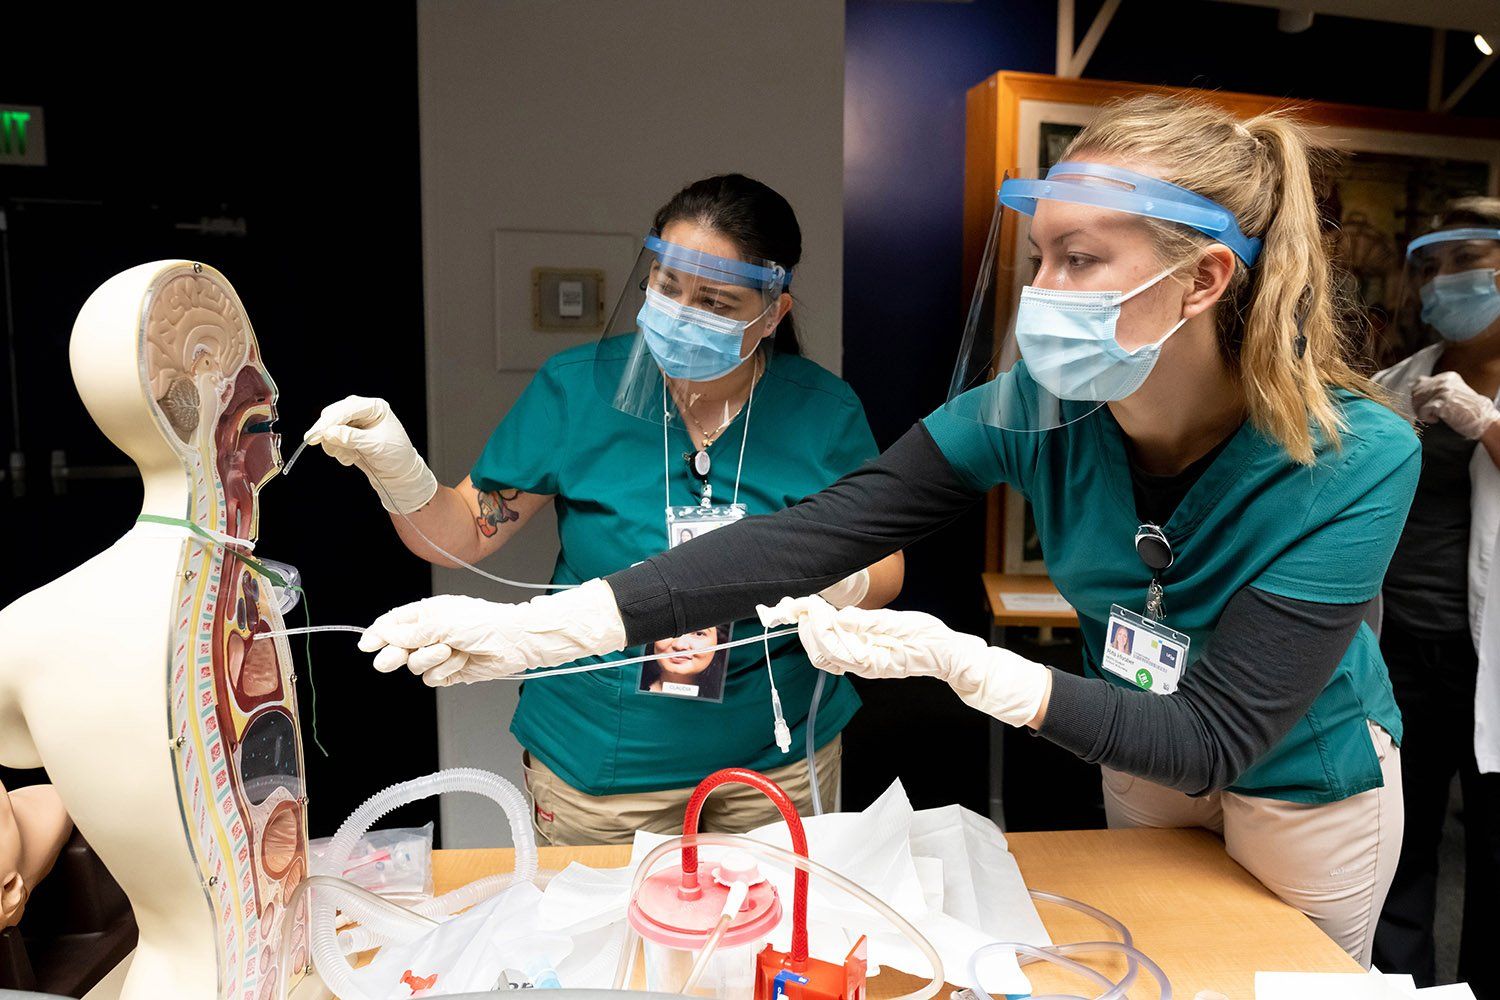 Two students practice a tracheostomy procedure on a simulation model while wearing masks, face shields, and gloves